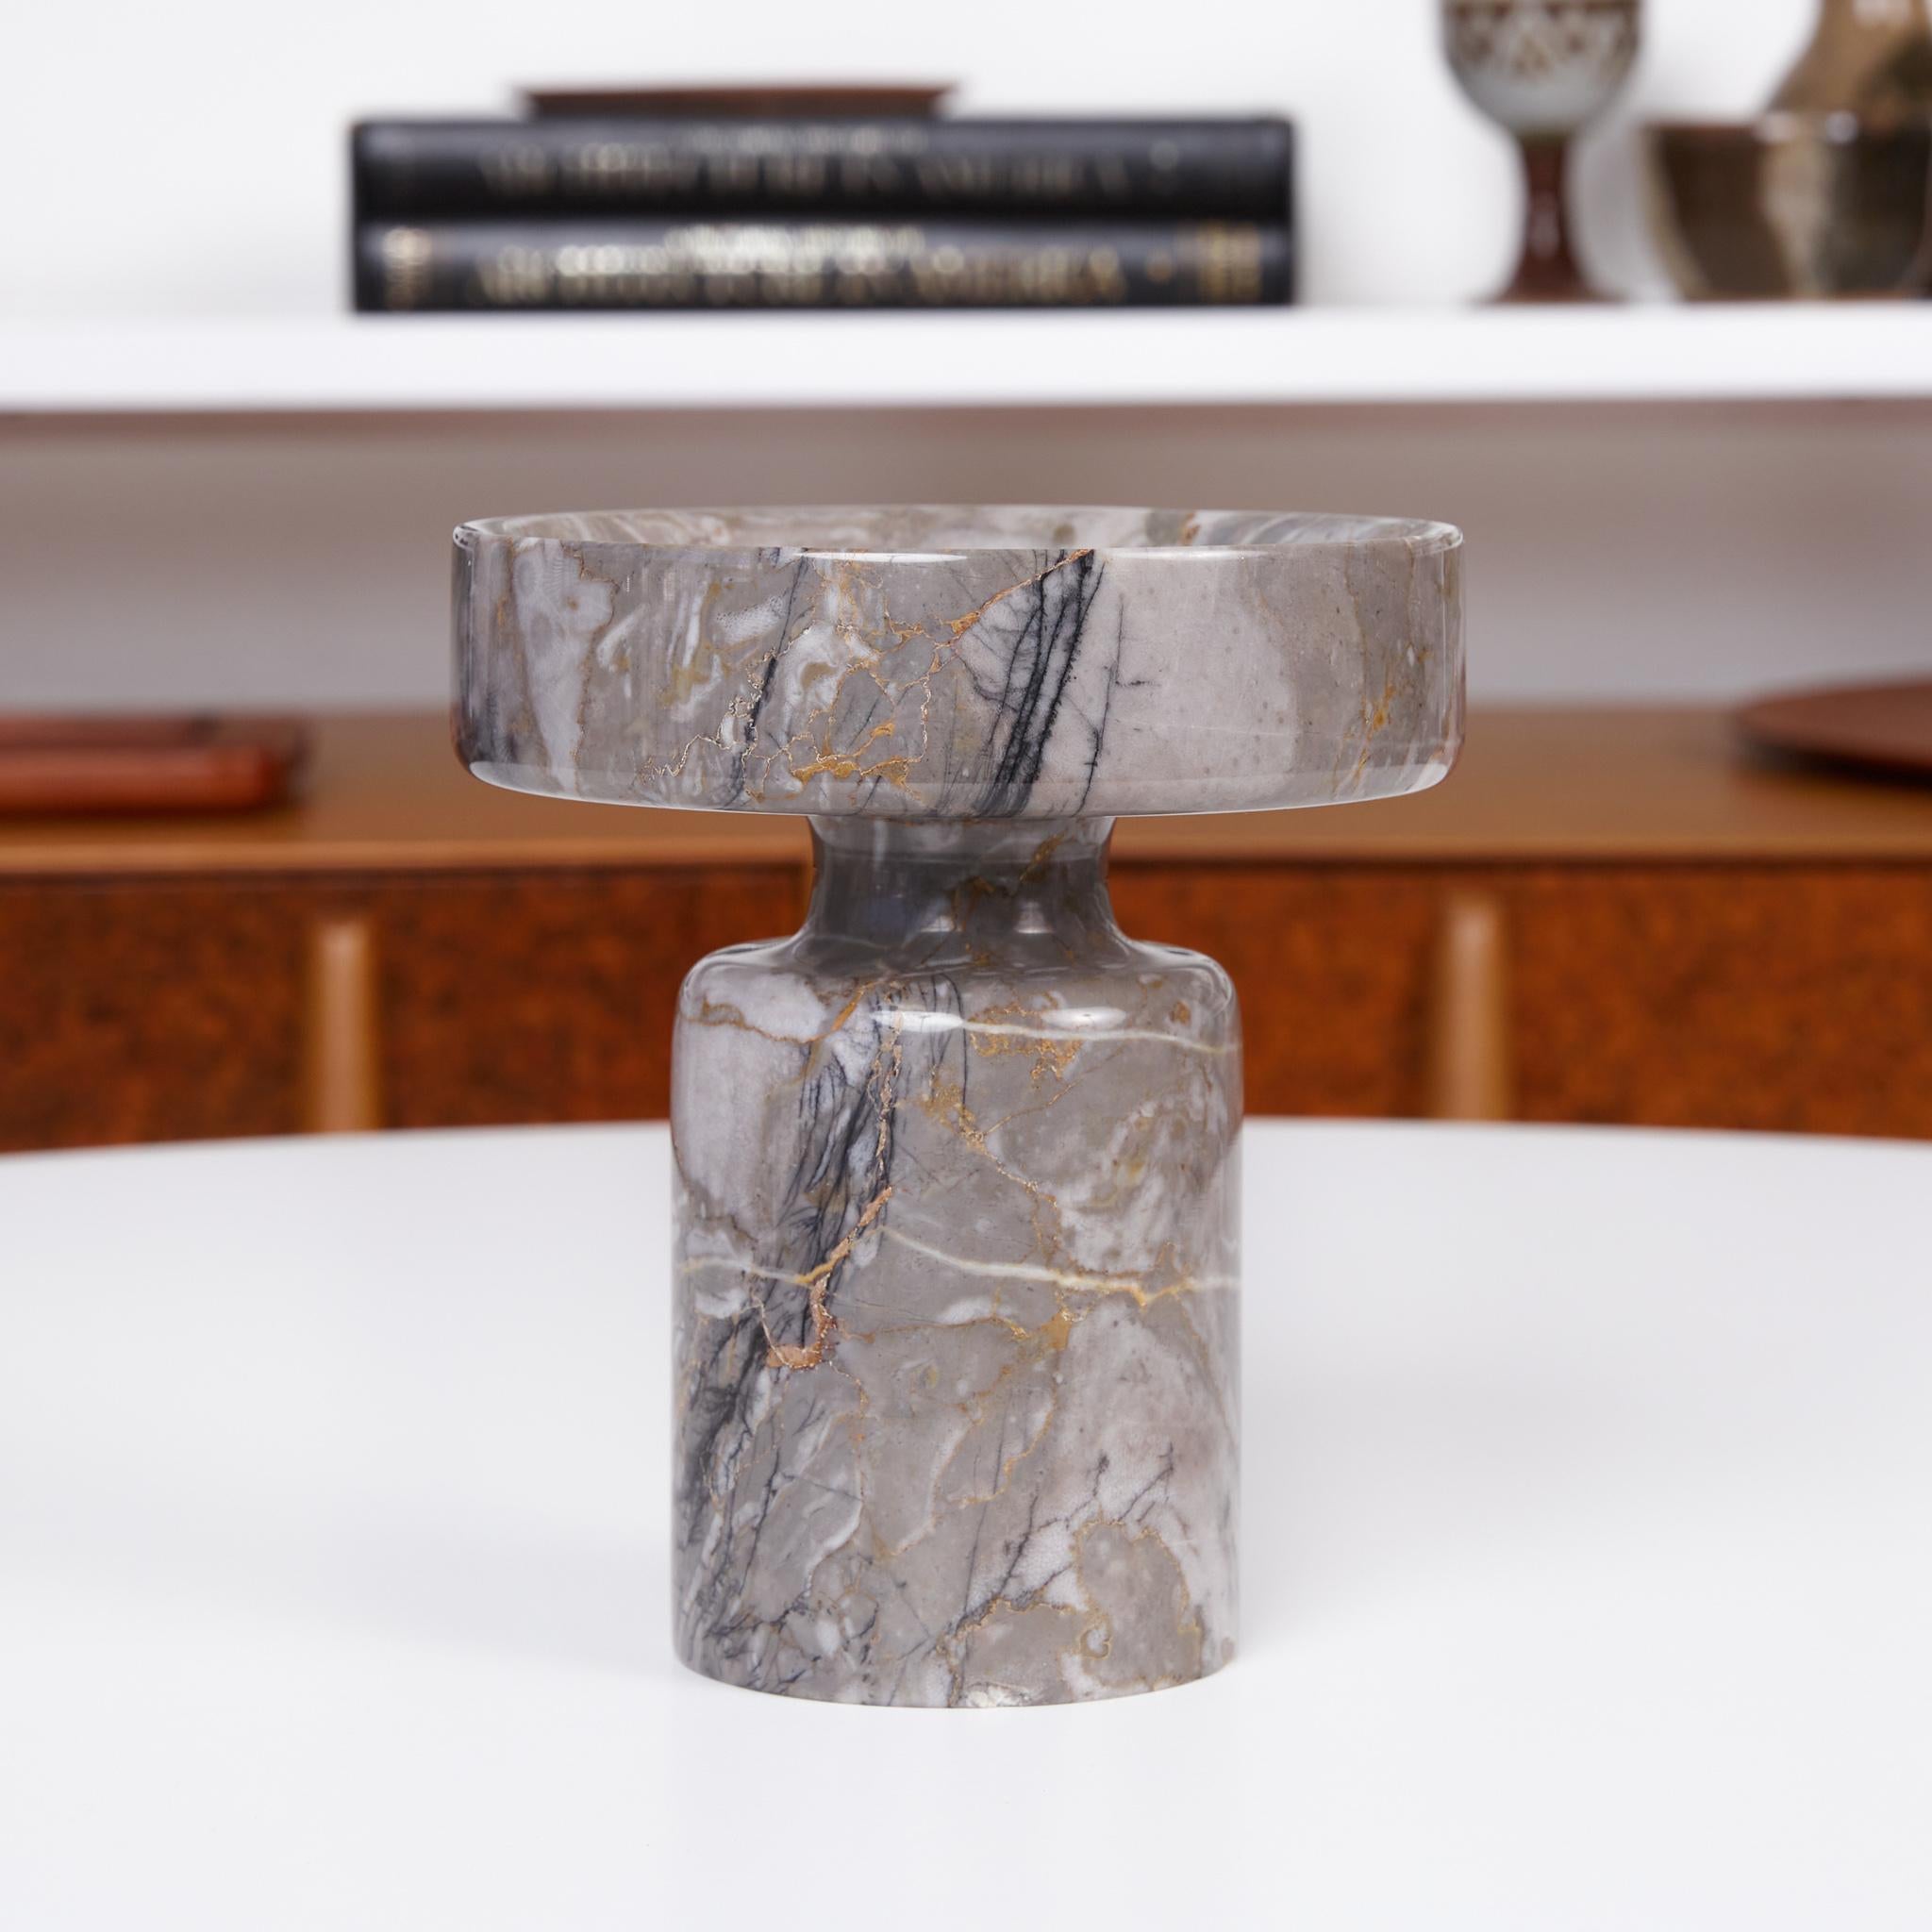 Double sided marble object by Angelo Mangiarotti for Knoll, Italy, circa 1960s. The gray marble sculptural object features openings on either side, offering multiple functions; as a vase, a pedestal stand for a candle or sculpture, or simply as a